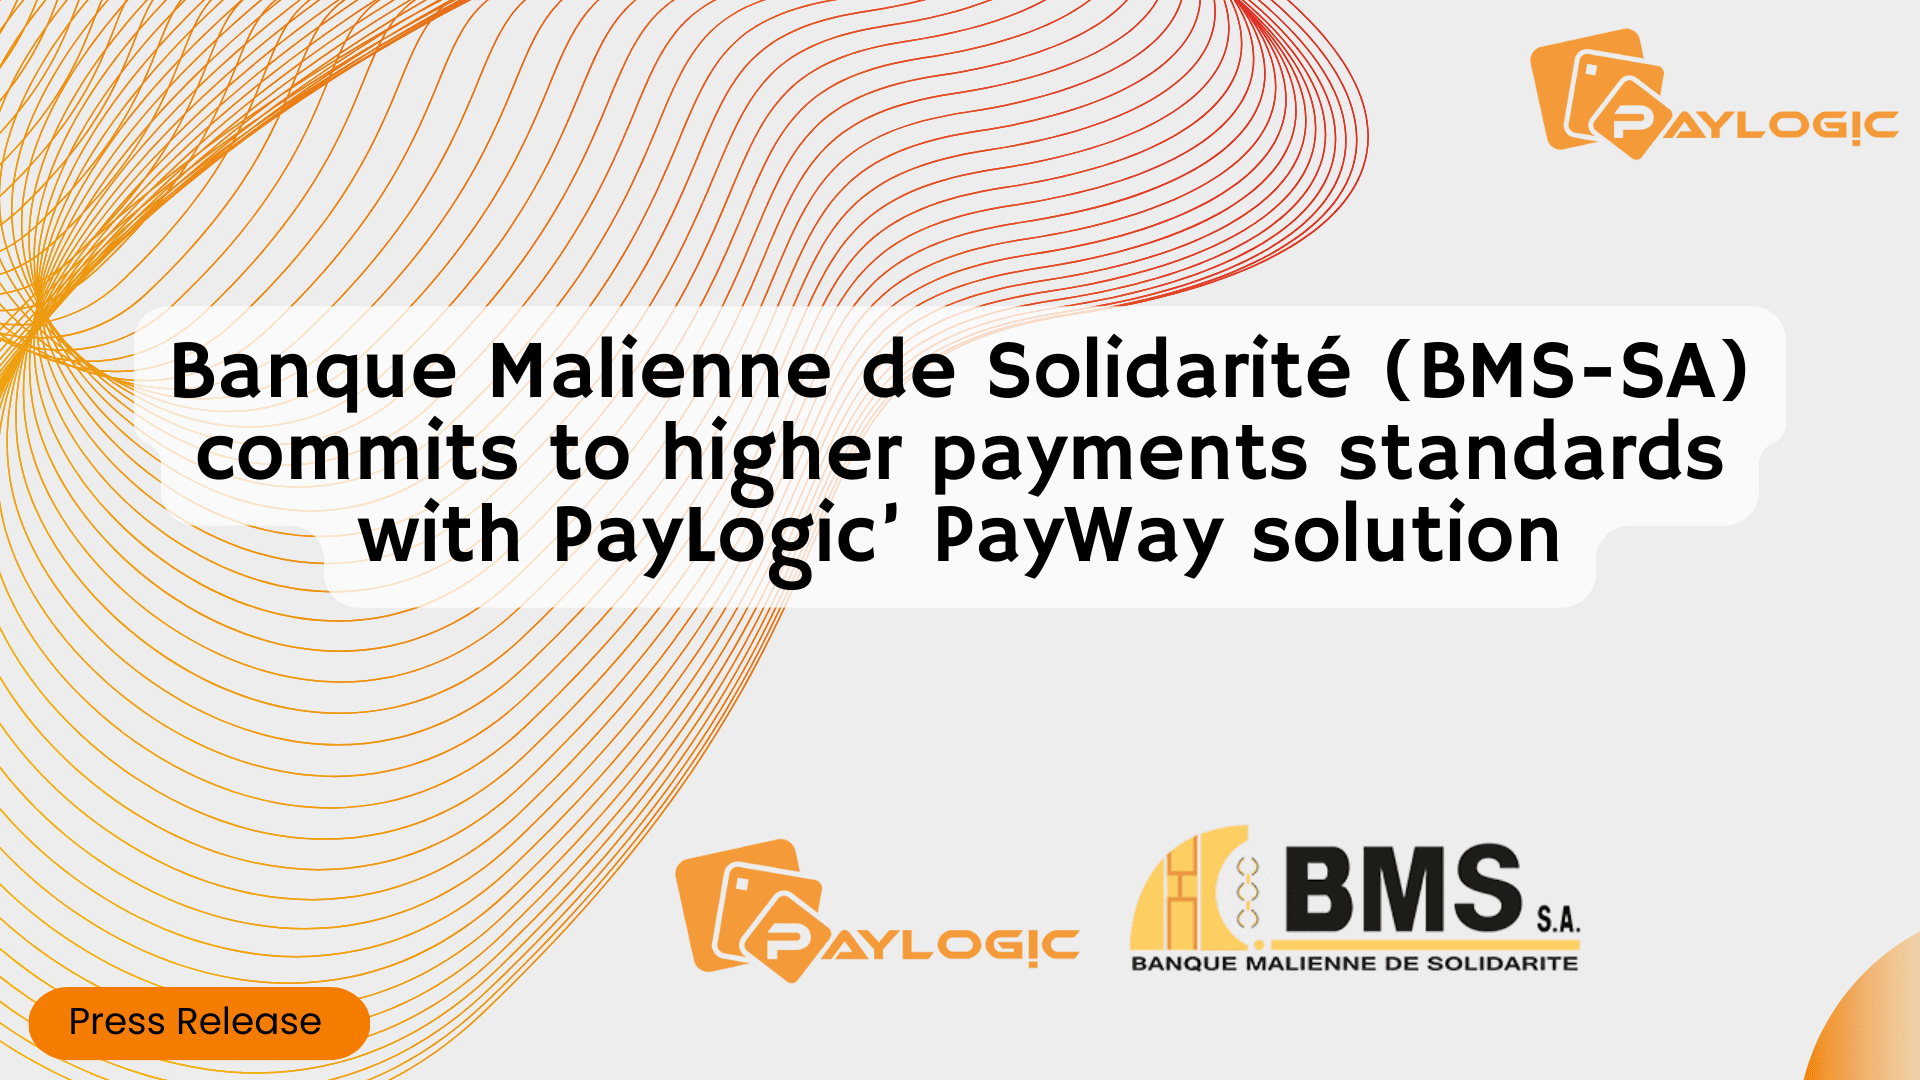 PayLogic Secures Tender with Banque Malienne de Solidarité (BMS-SA) to Revolutionize Payment Systems